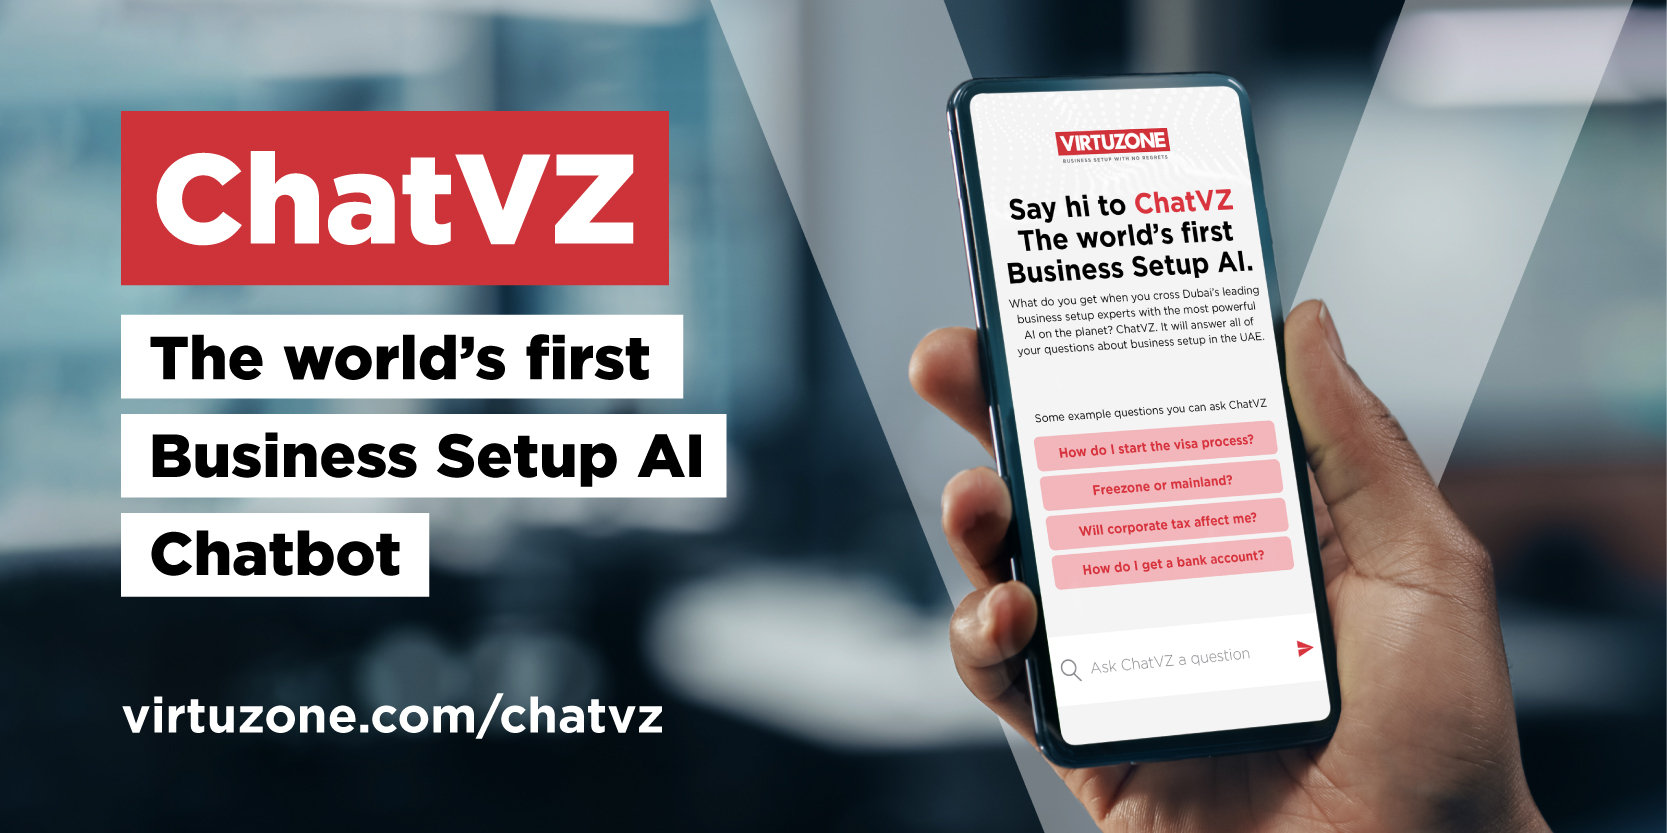 Virtuzone-pioneers-the-world’s-first-business-setup-AI-chatbot-ChatVZ